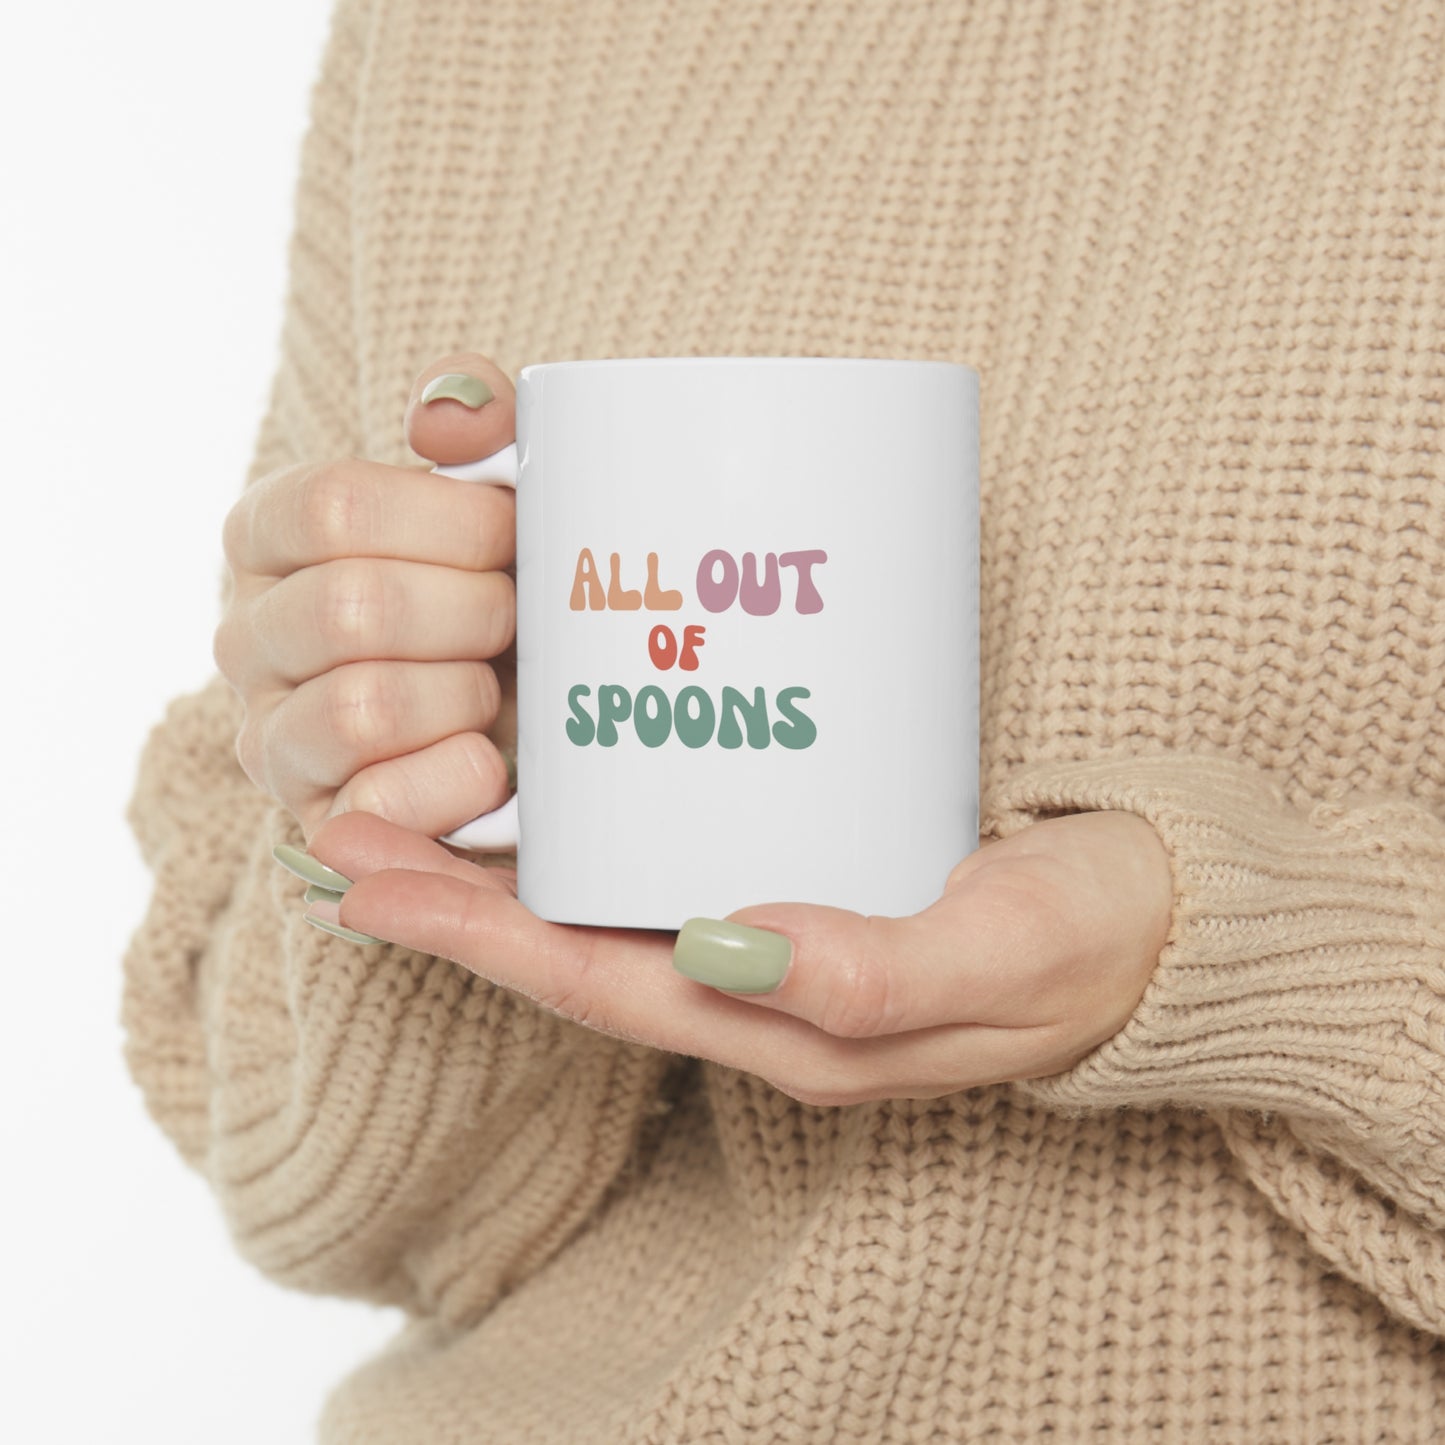 All Out Of Spoons Mug